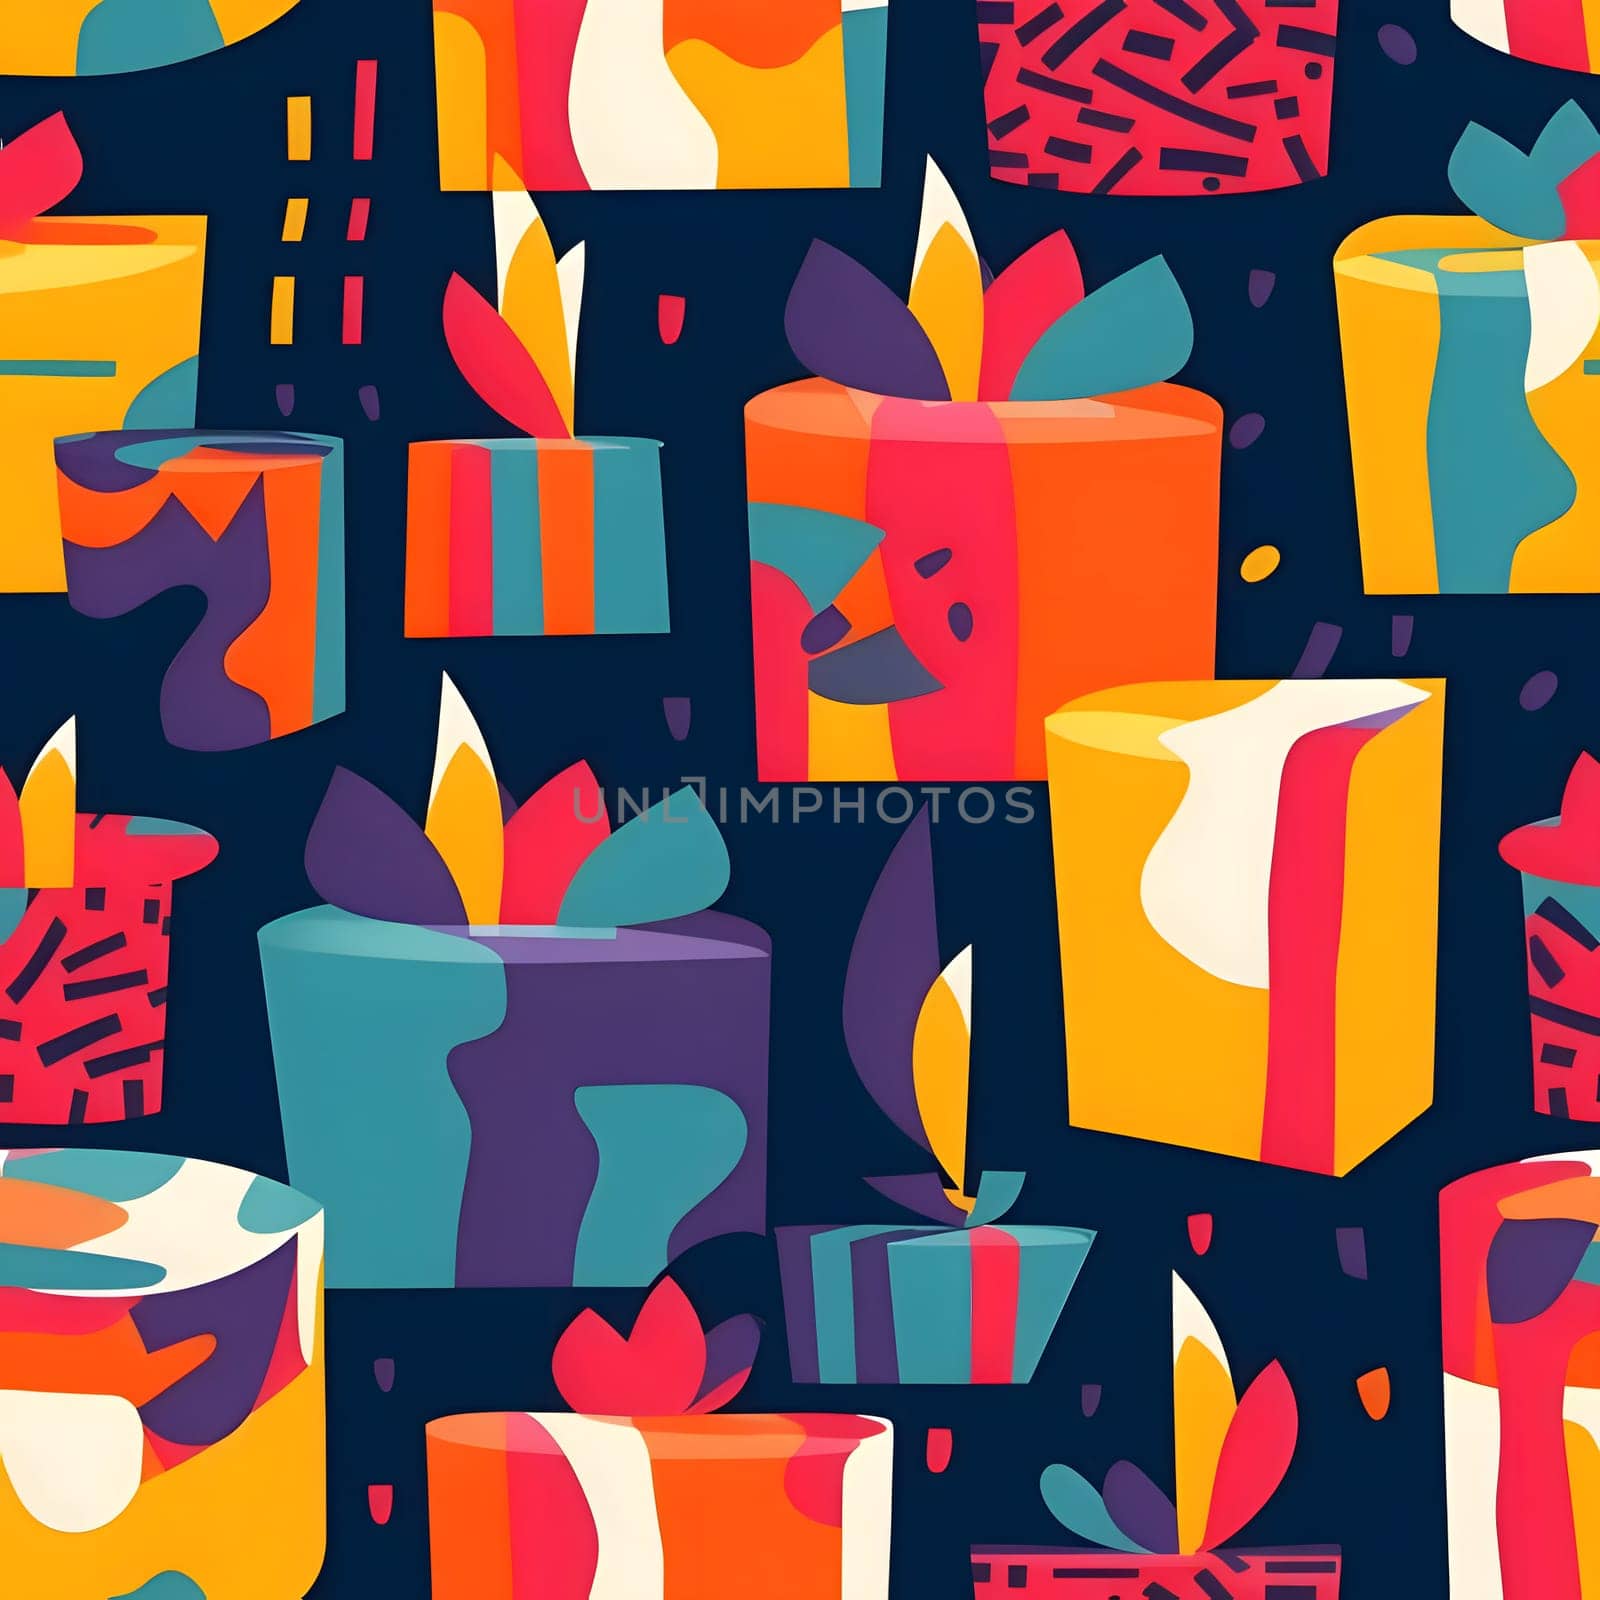 Patterns and banners backgrounds: Seamless pattern with candles and gift boxes. Vector illustration.